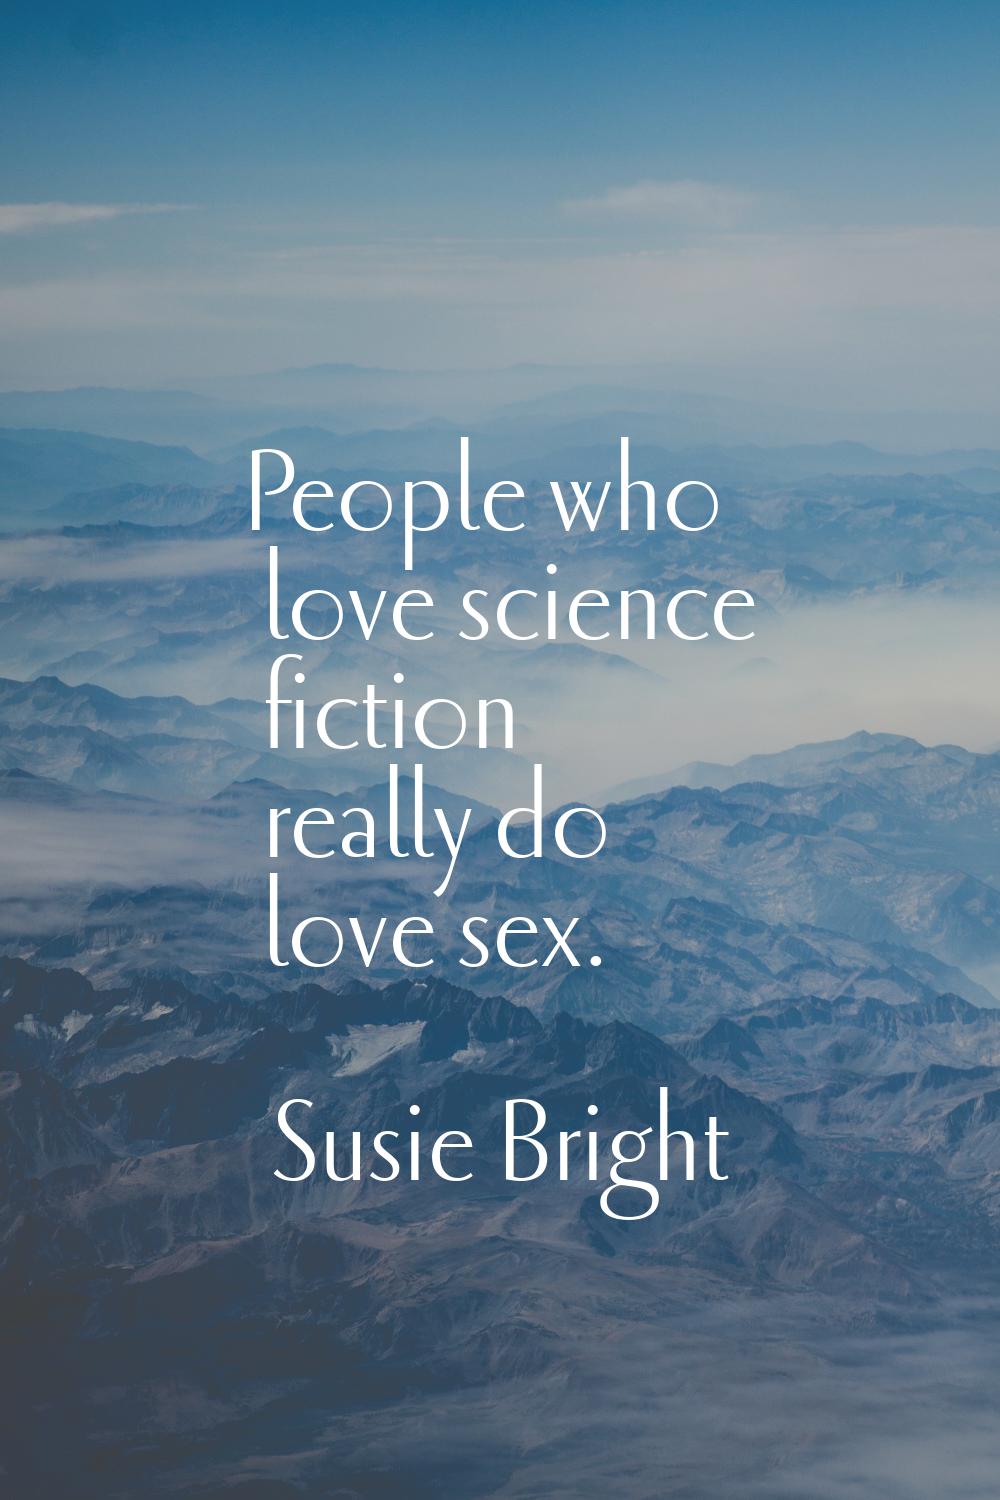 People who love science fiction really do love sex.